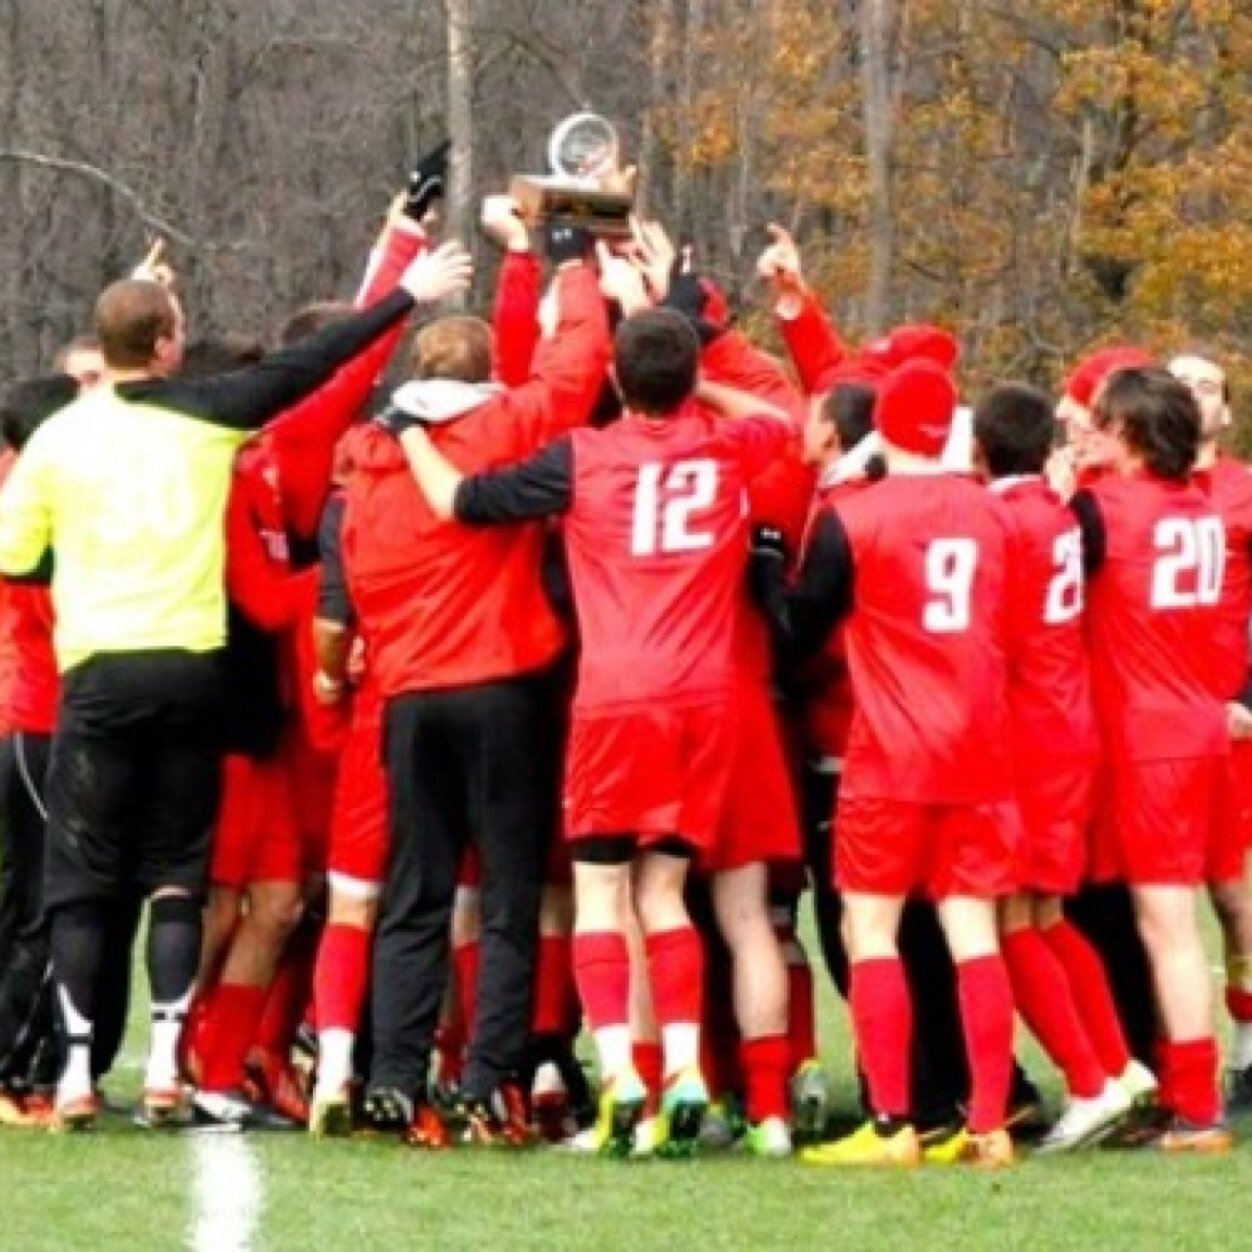 The Official twitter page of the Plattsburgh State Mens Soccer team, giving you game summary's, statistics and information/humor about the team!